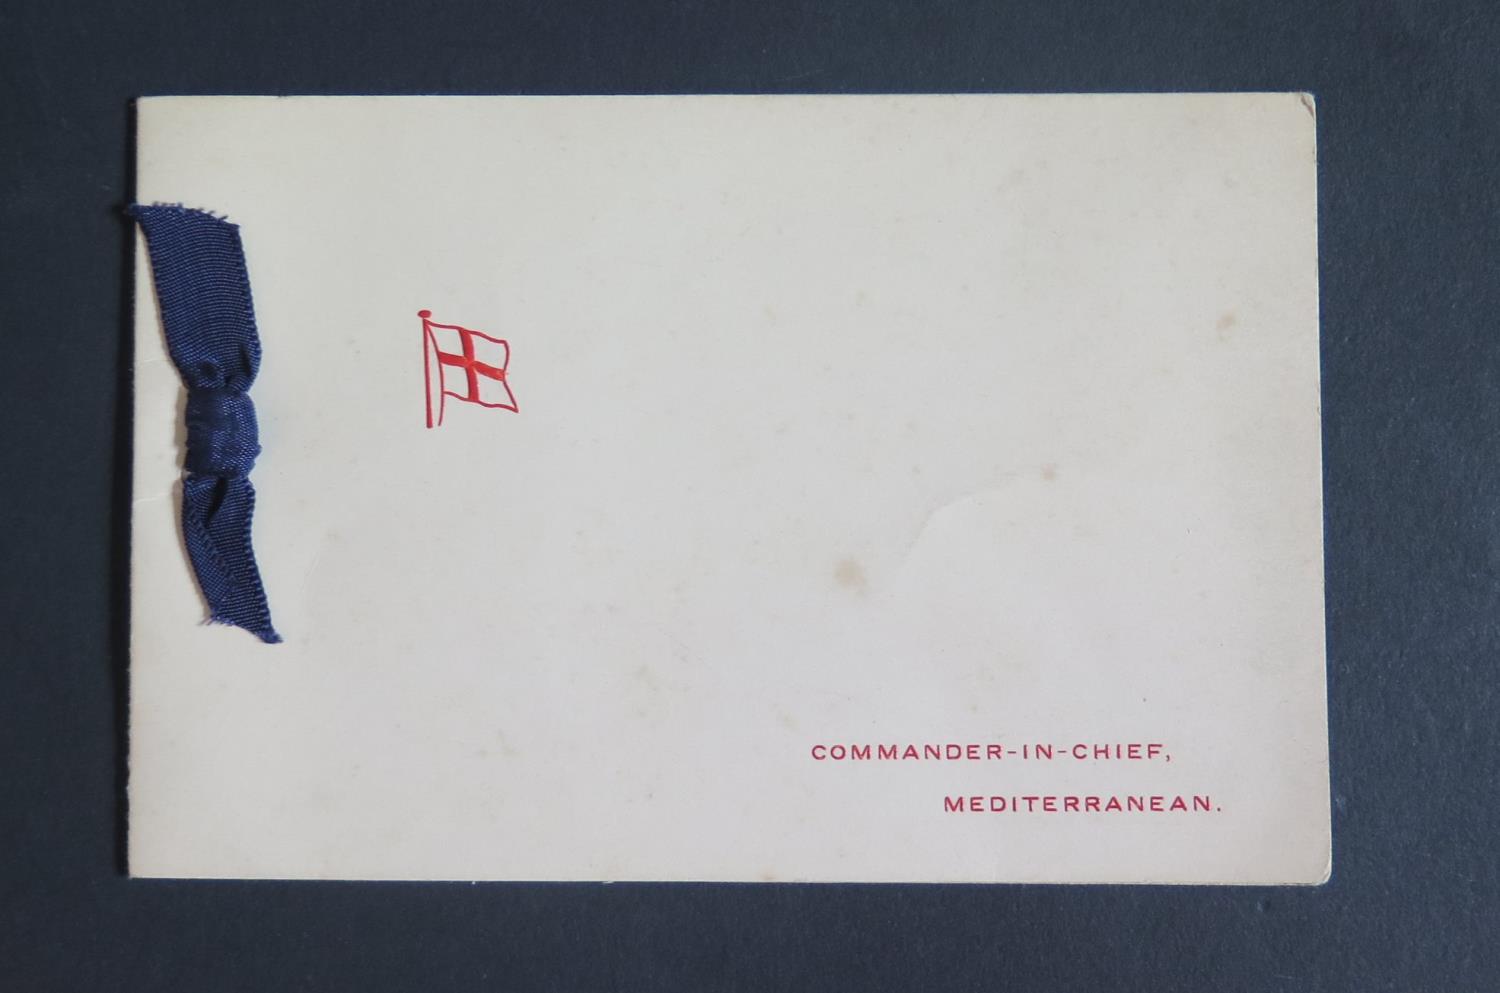 An Official Christmas Card from The Mediterranean Commander-In-Chief signed in ink by Mountbatten of - Image 2 of 2